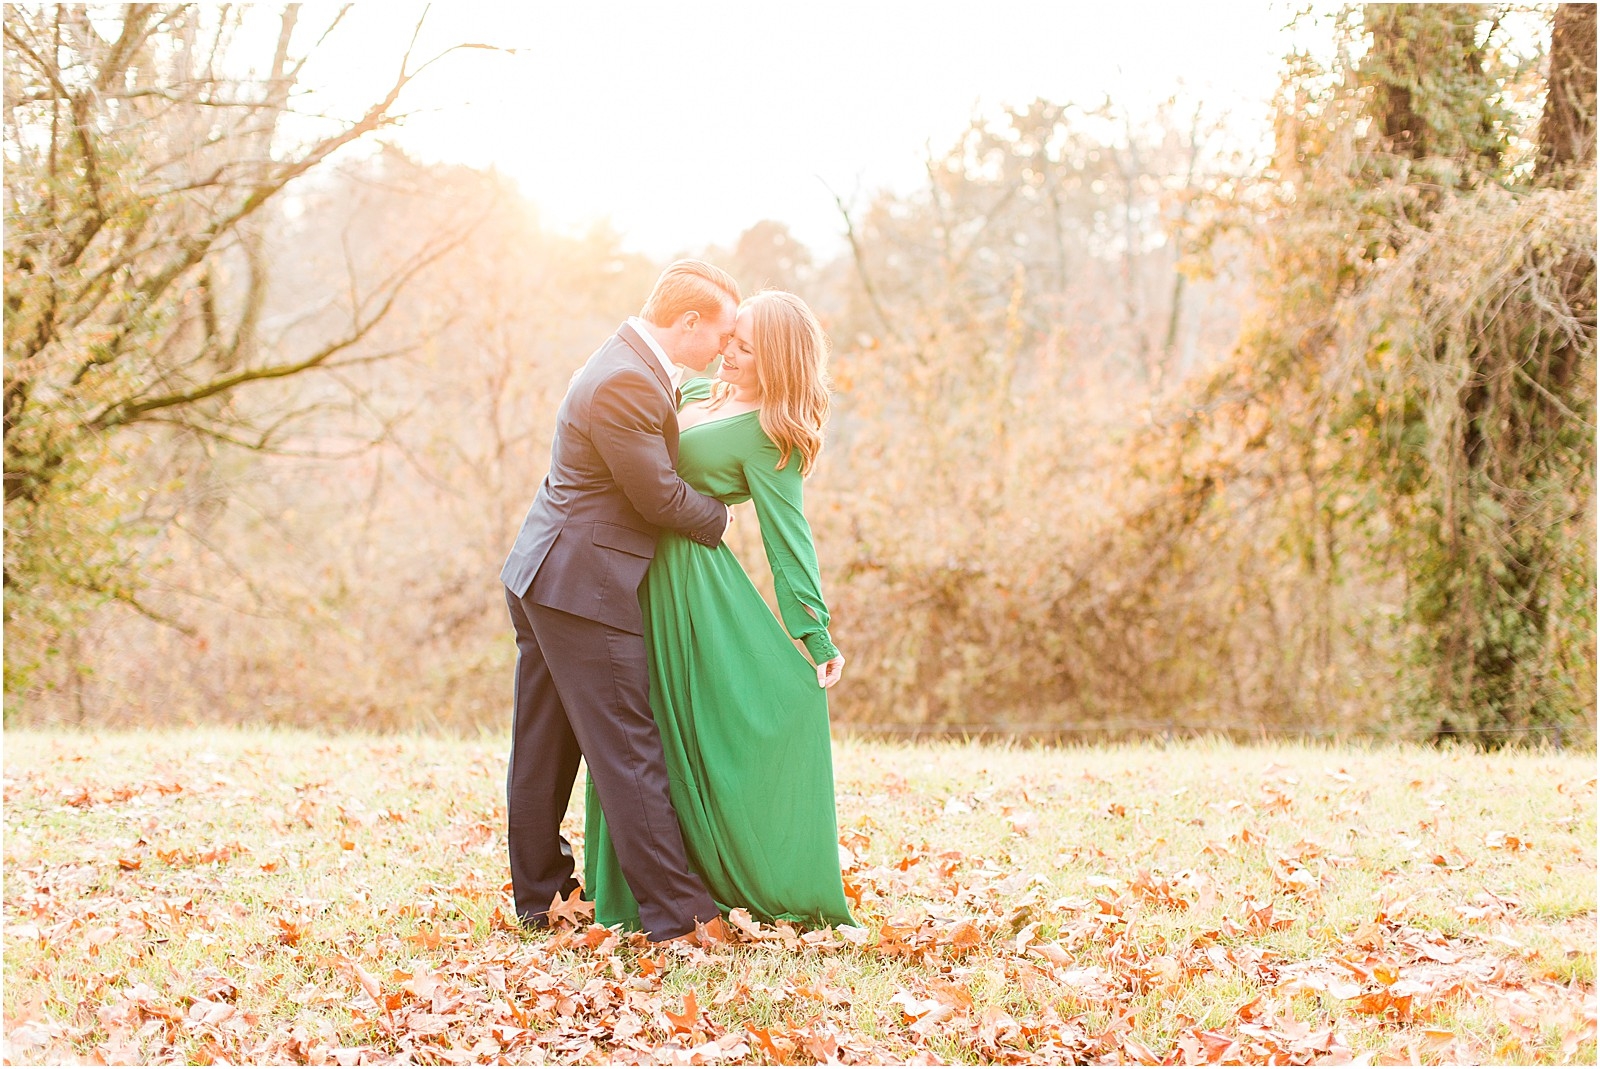 A Mesker Park Zoo Engagement Session | Jennah and Steve | Bret and Brandie Photography027.jpg